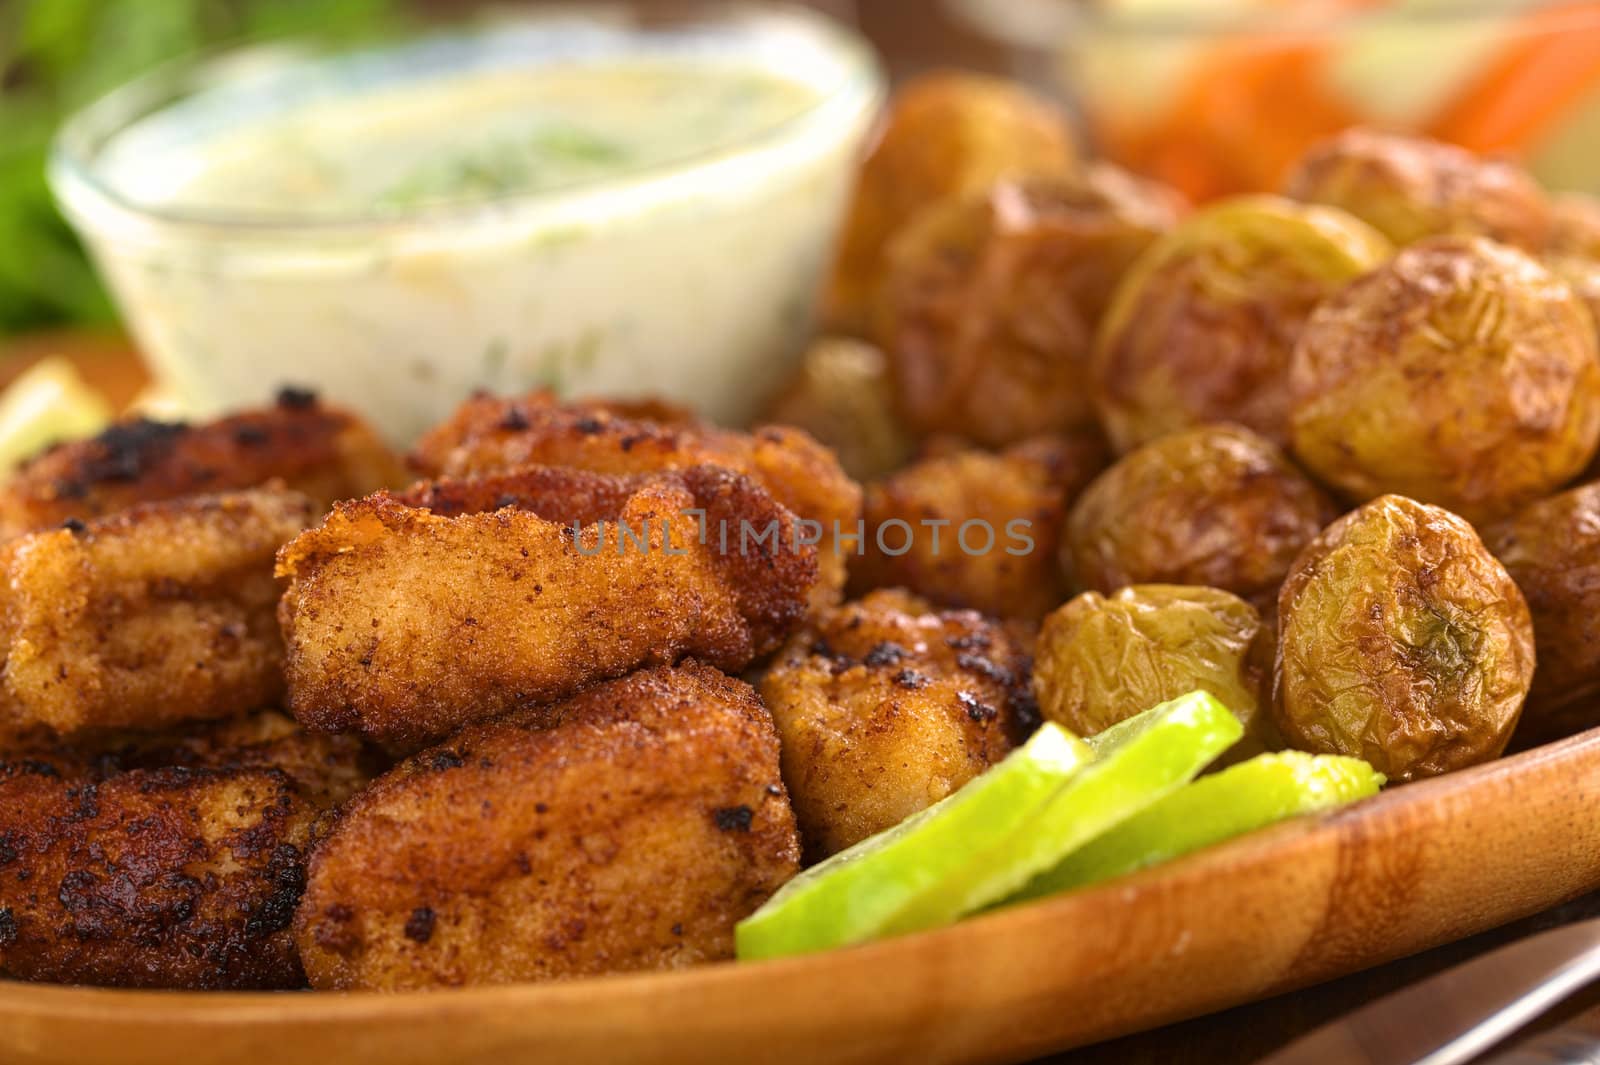 Breaded Calamary with Baked Potatoes by ildi